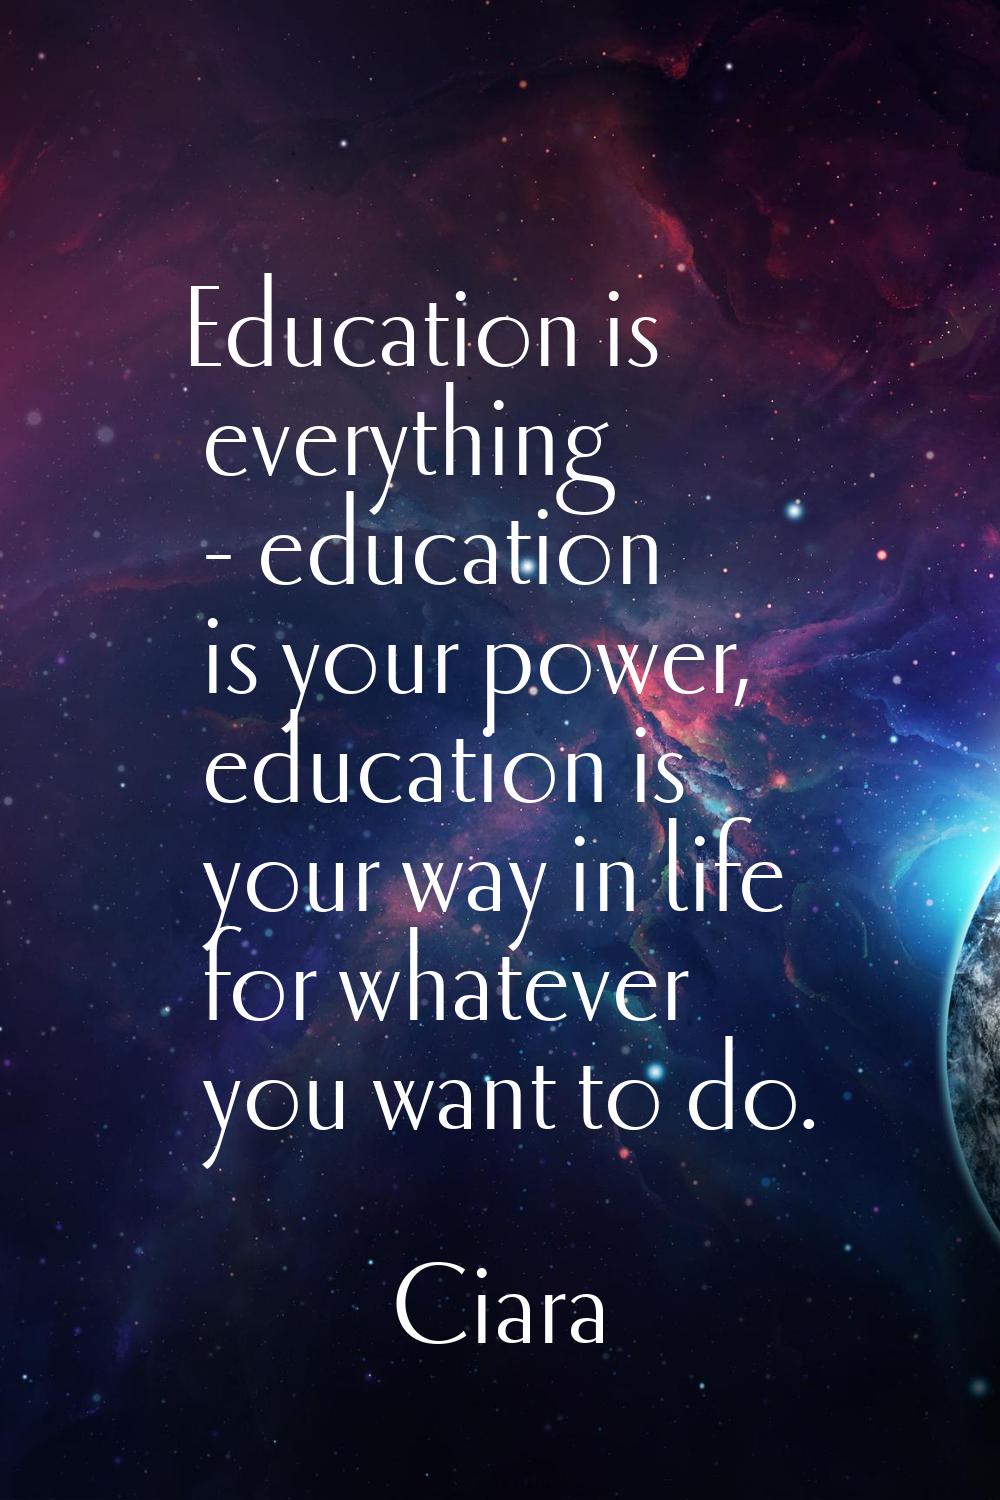 Education is everything - education is your power, education is your way in life for whatever you w